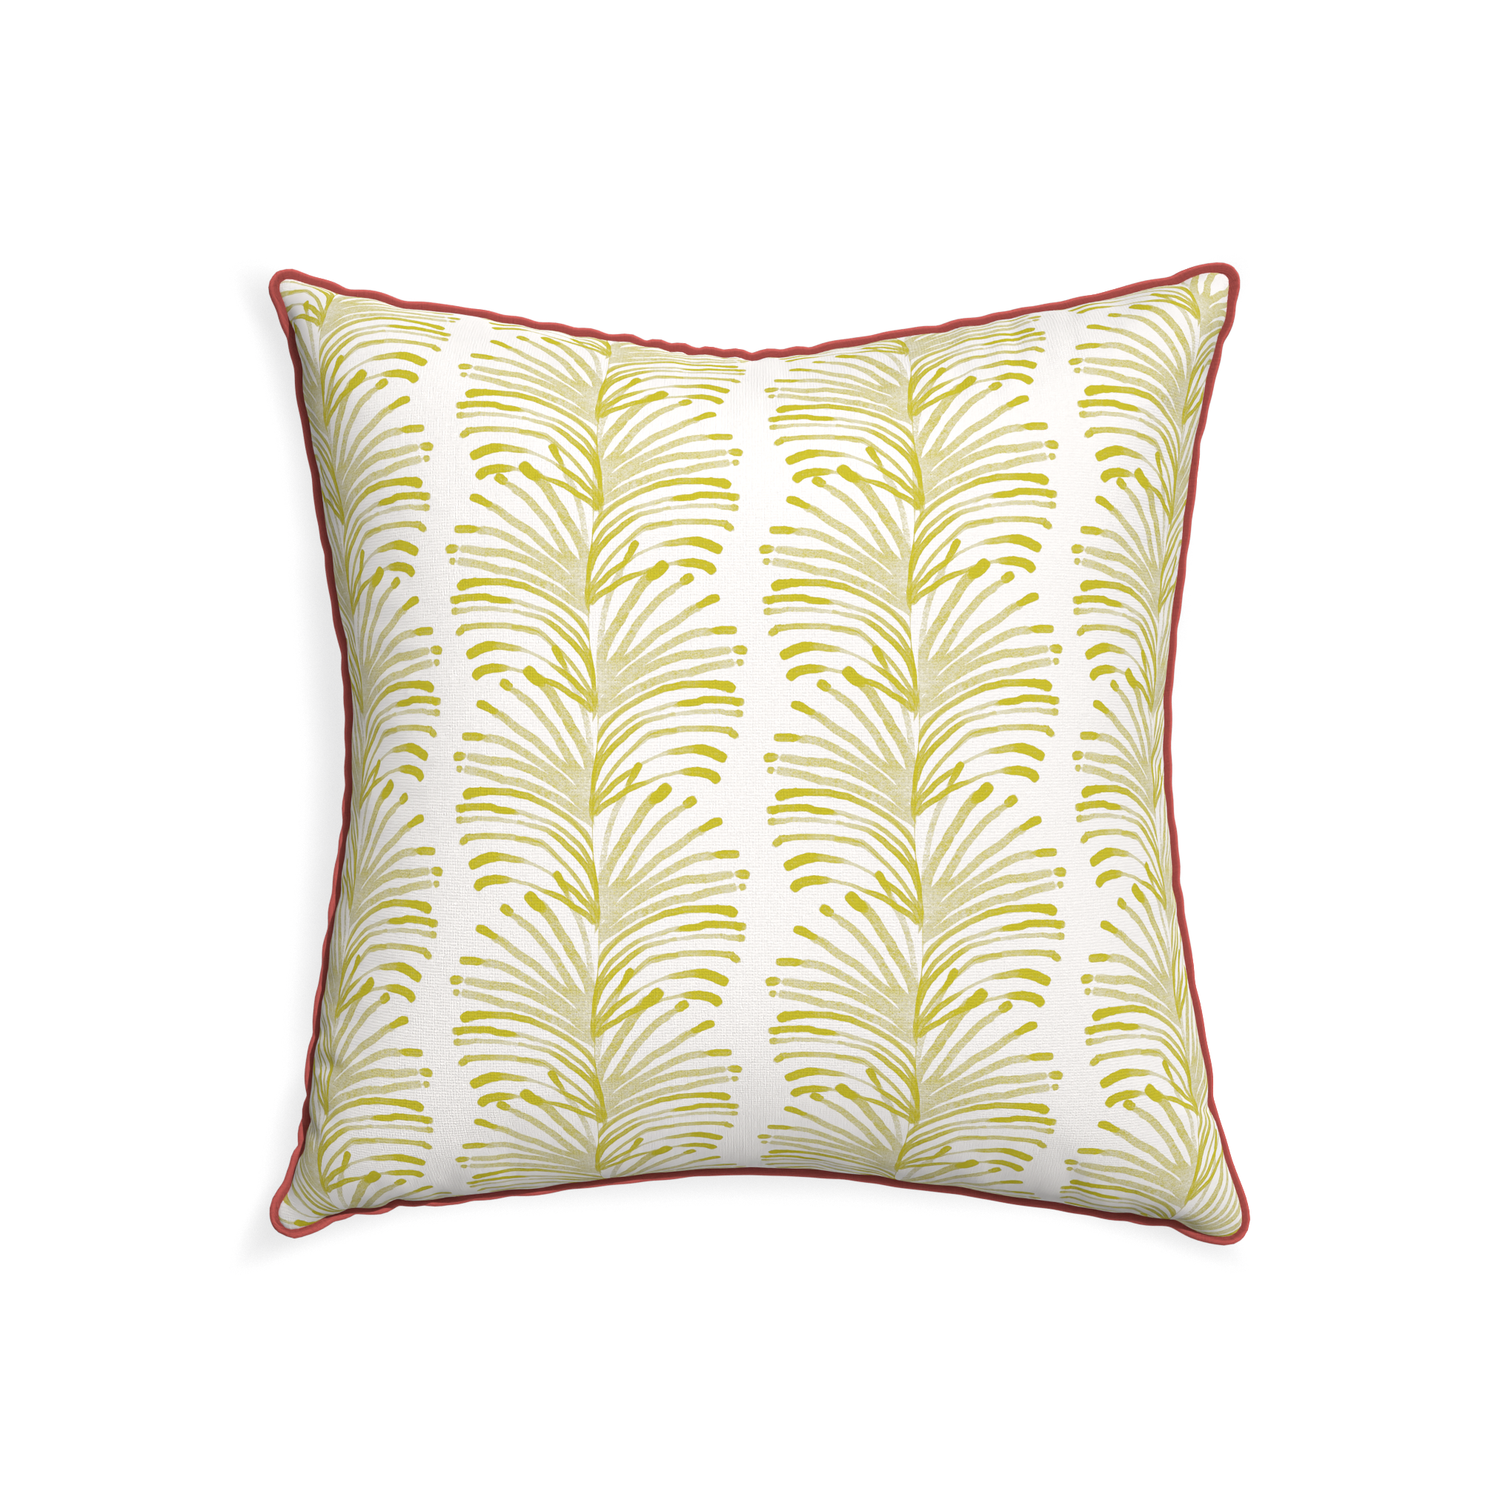 22-square emma chartreuse custom yellow stripe chartreusepillow with c piping on white background